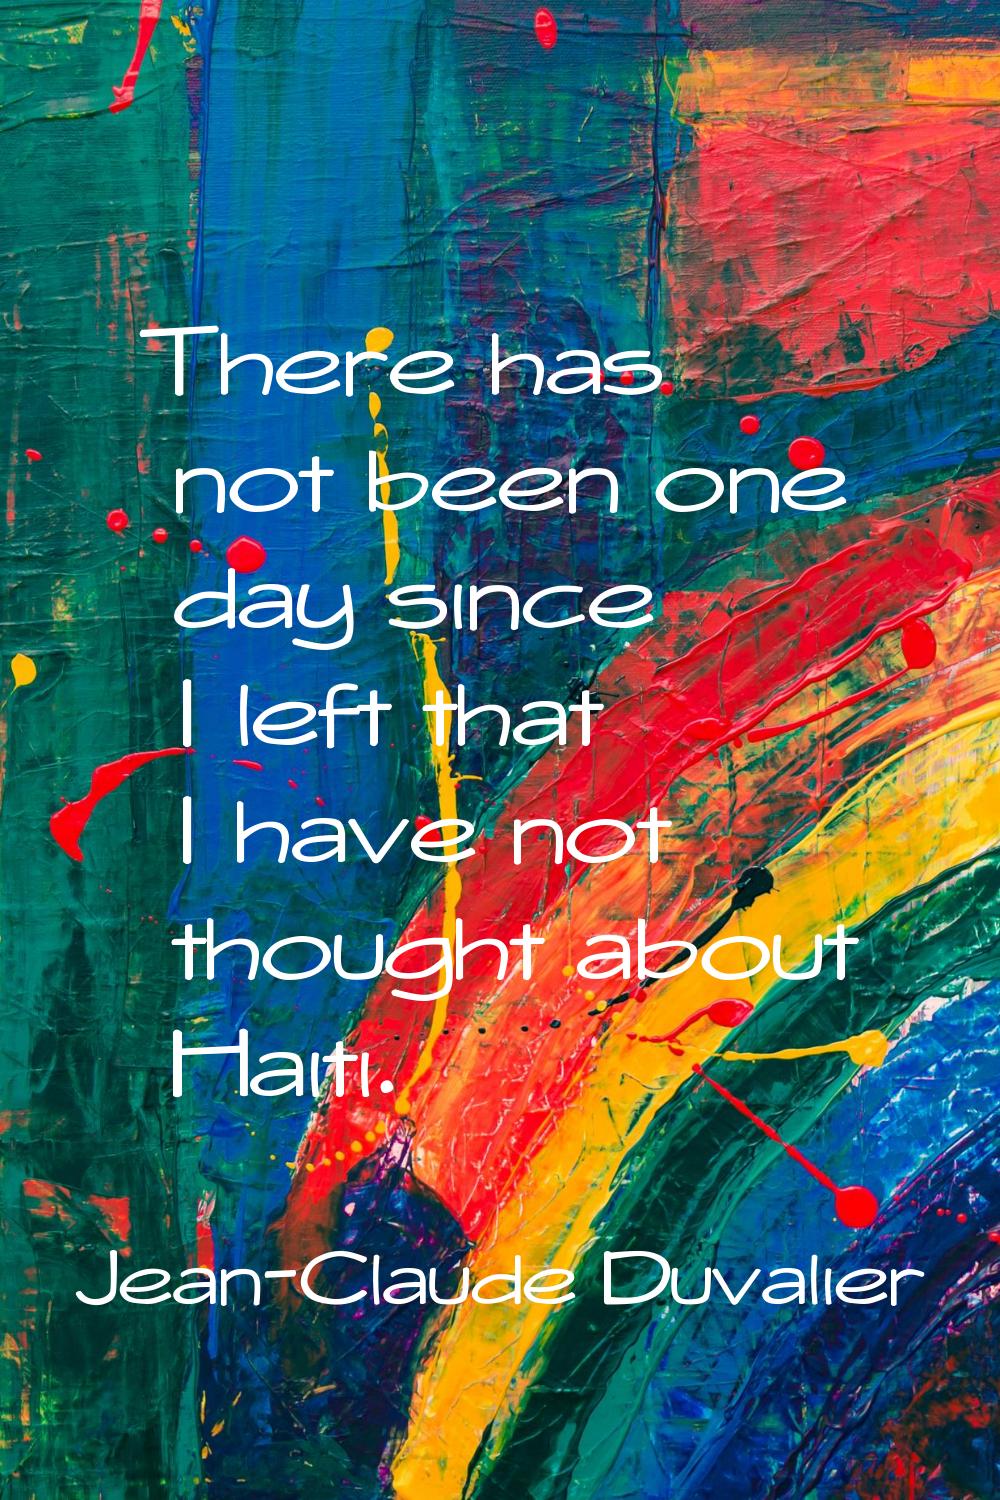 There has not been one day since I left that I have not thought about Haiti.